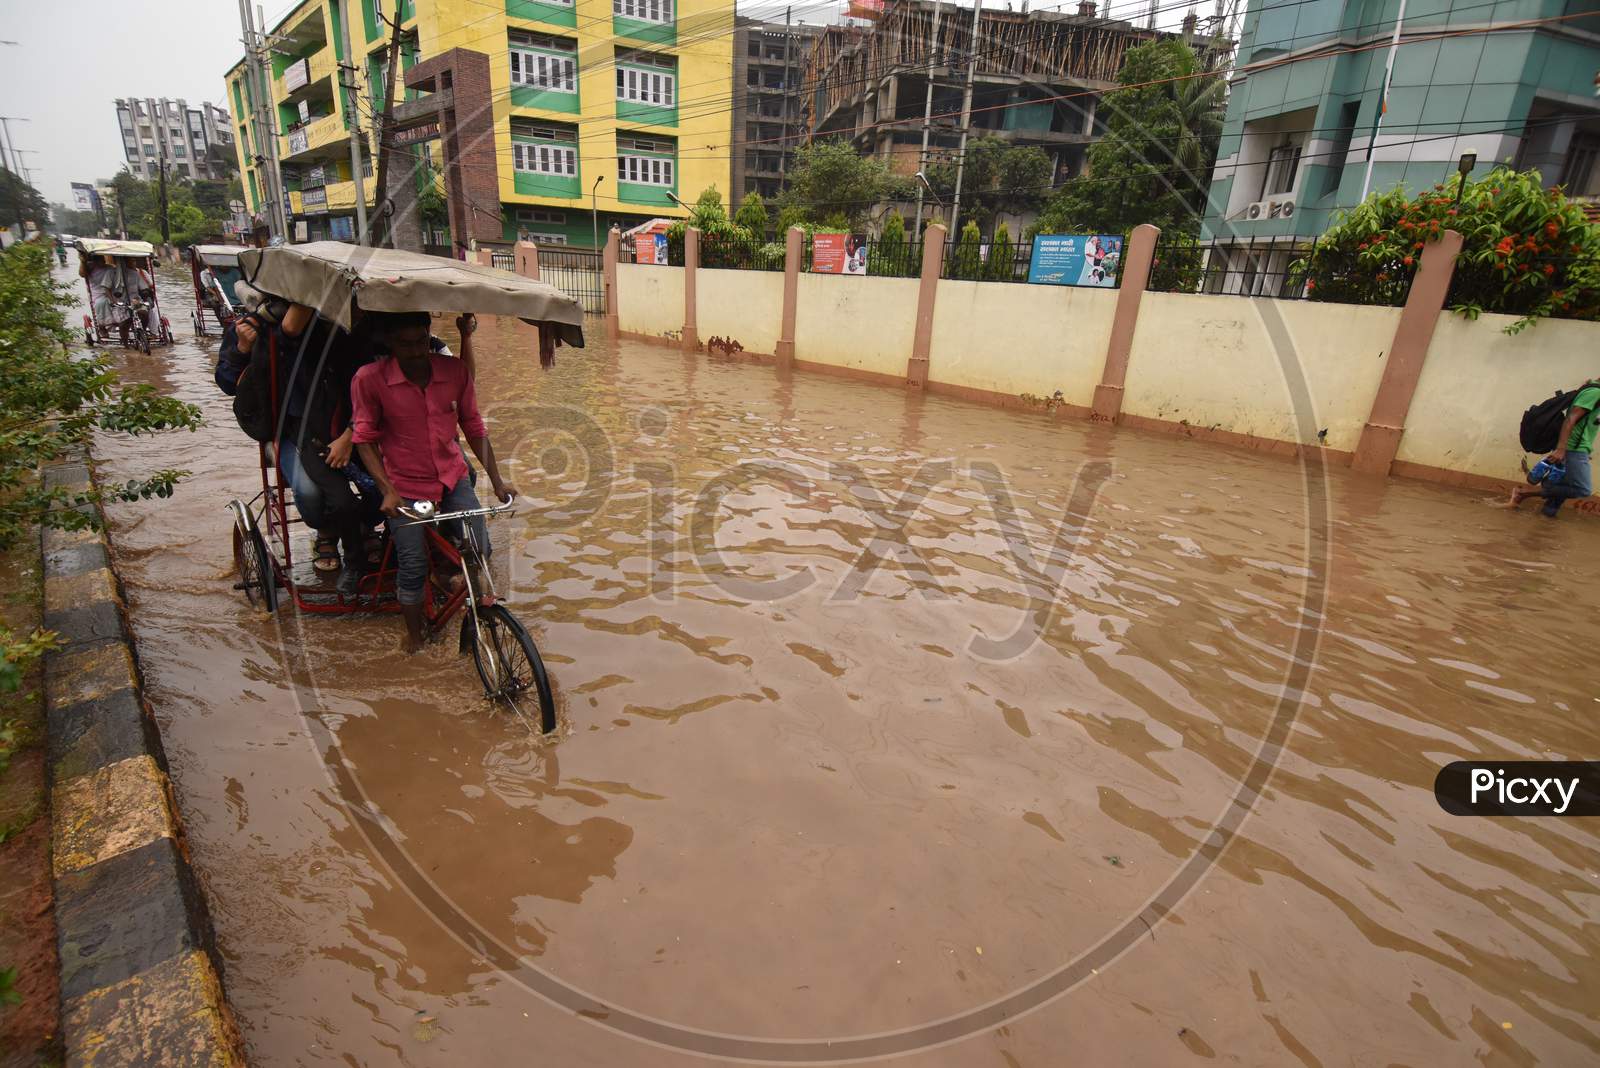 People Of Guwahati On Flooded Roads Due To Seasonal Floods In Assam